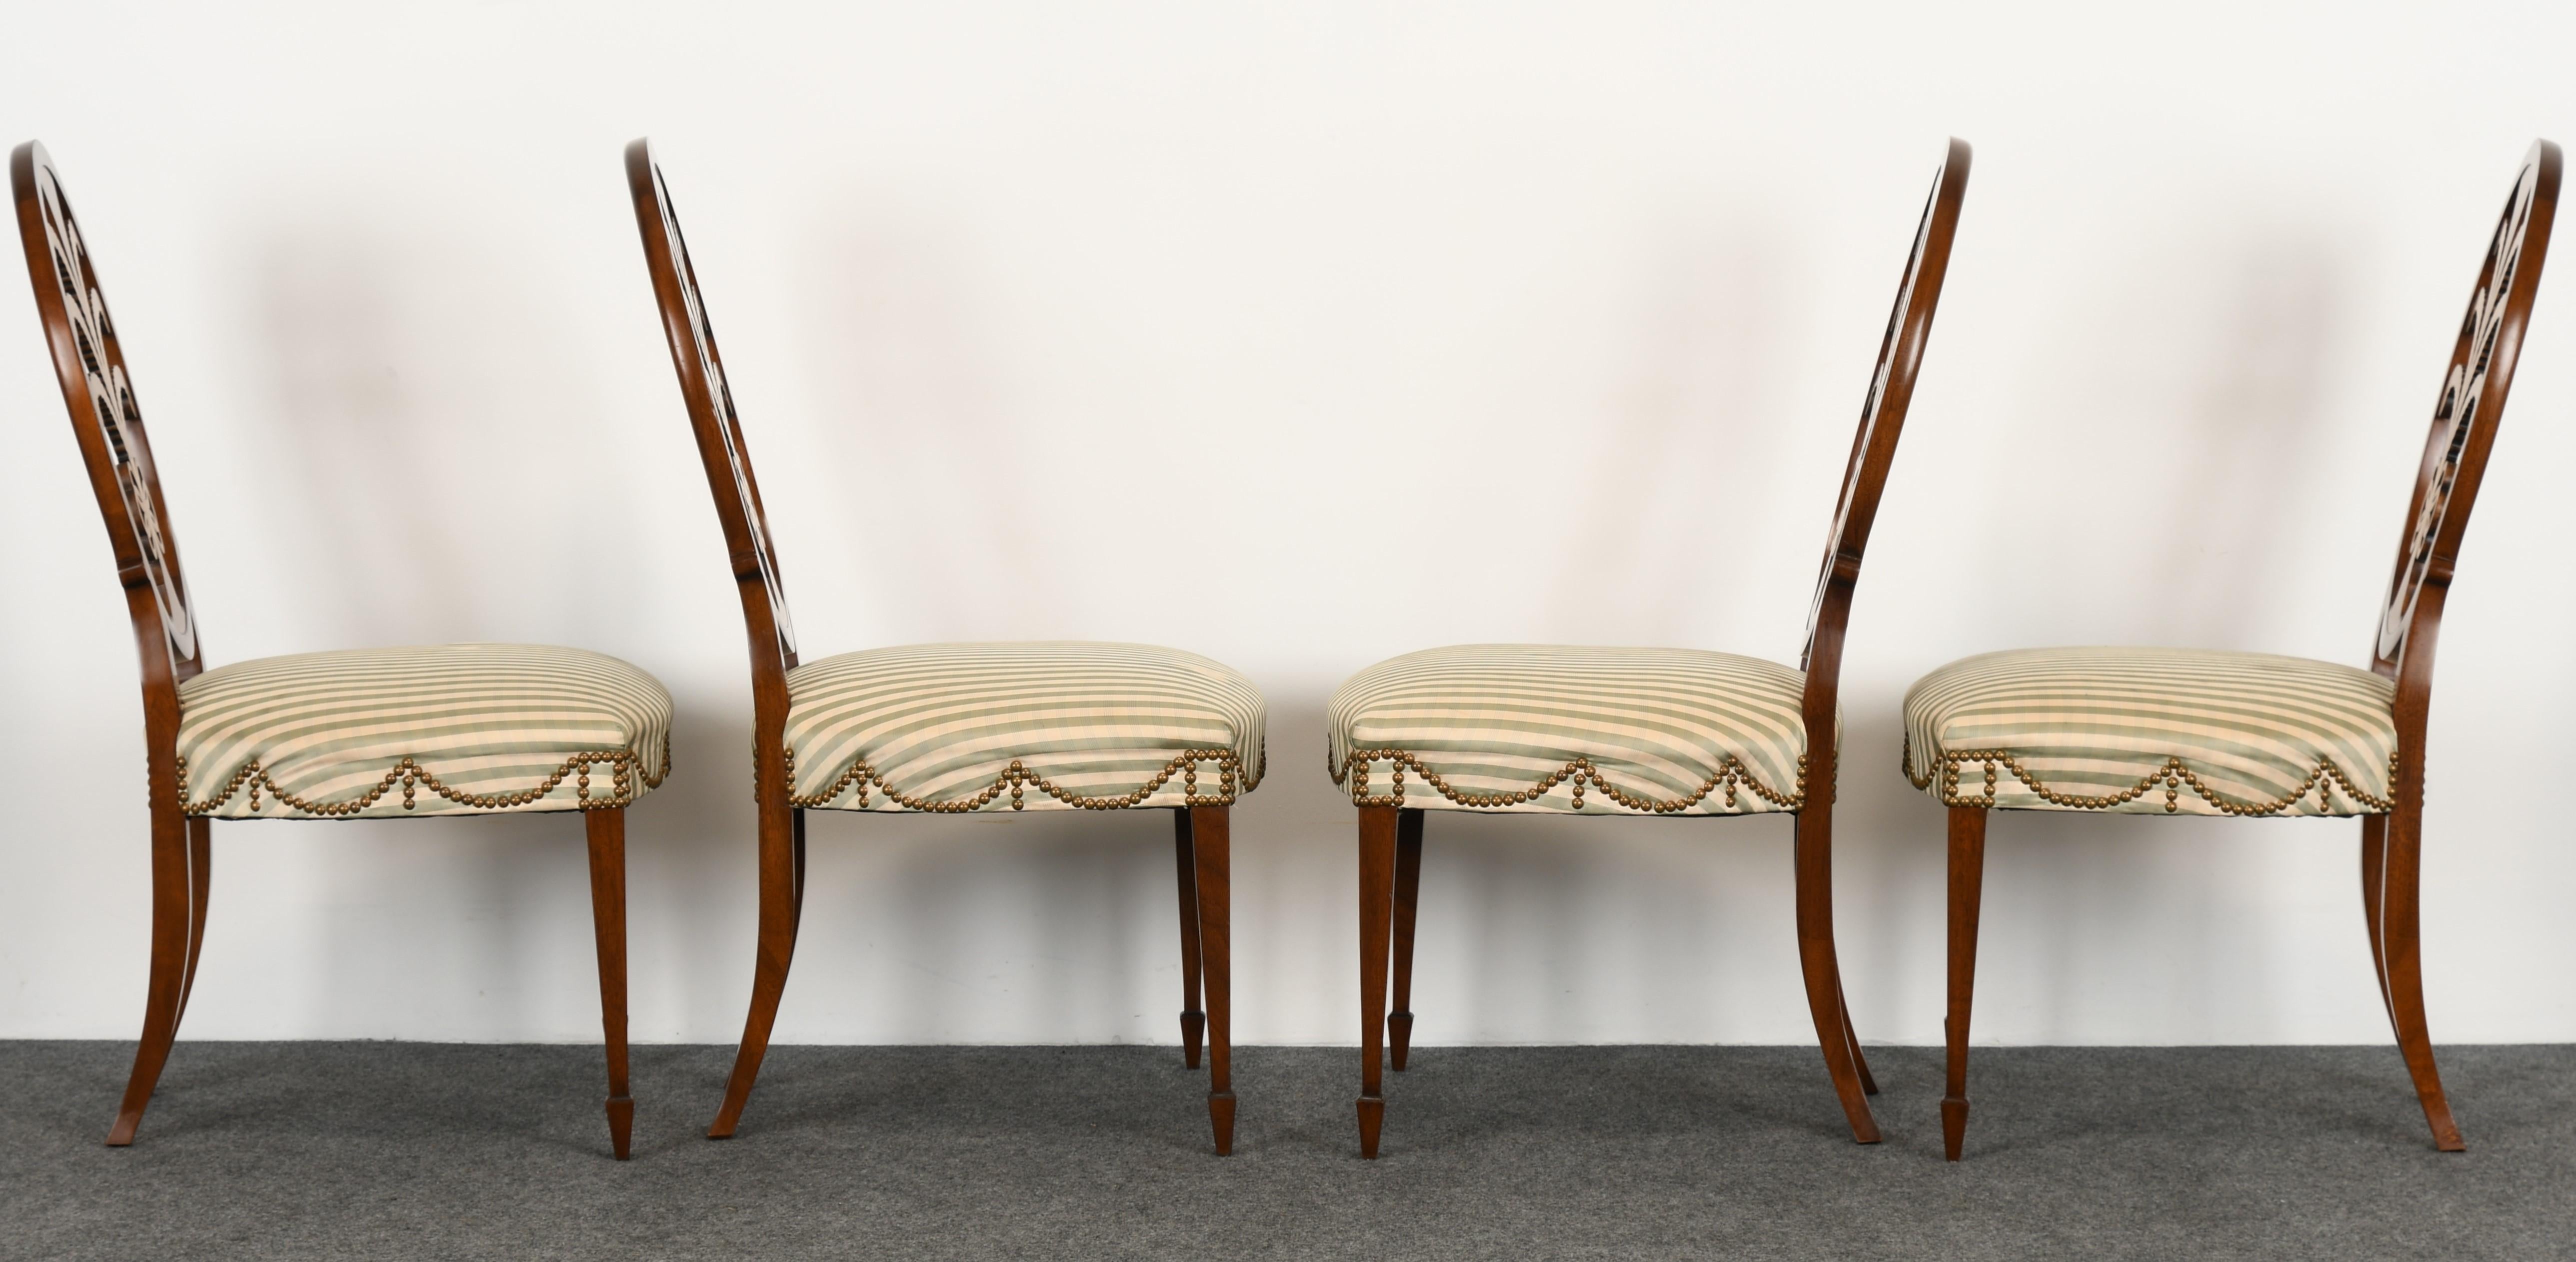 Set of Twelve Hepplewhite Chairs by Karges, 20th Century For Sale 7